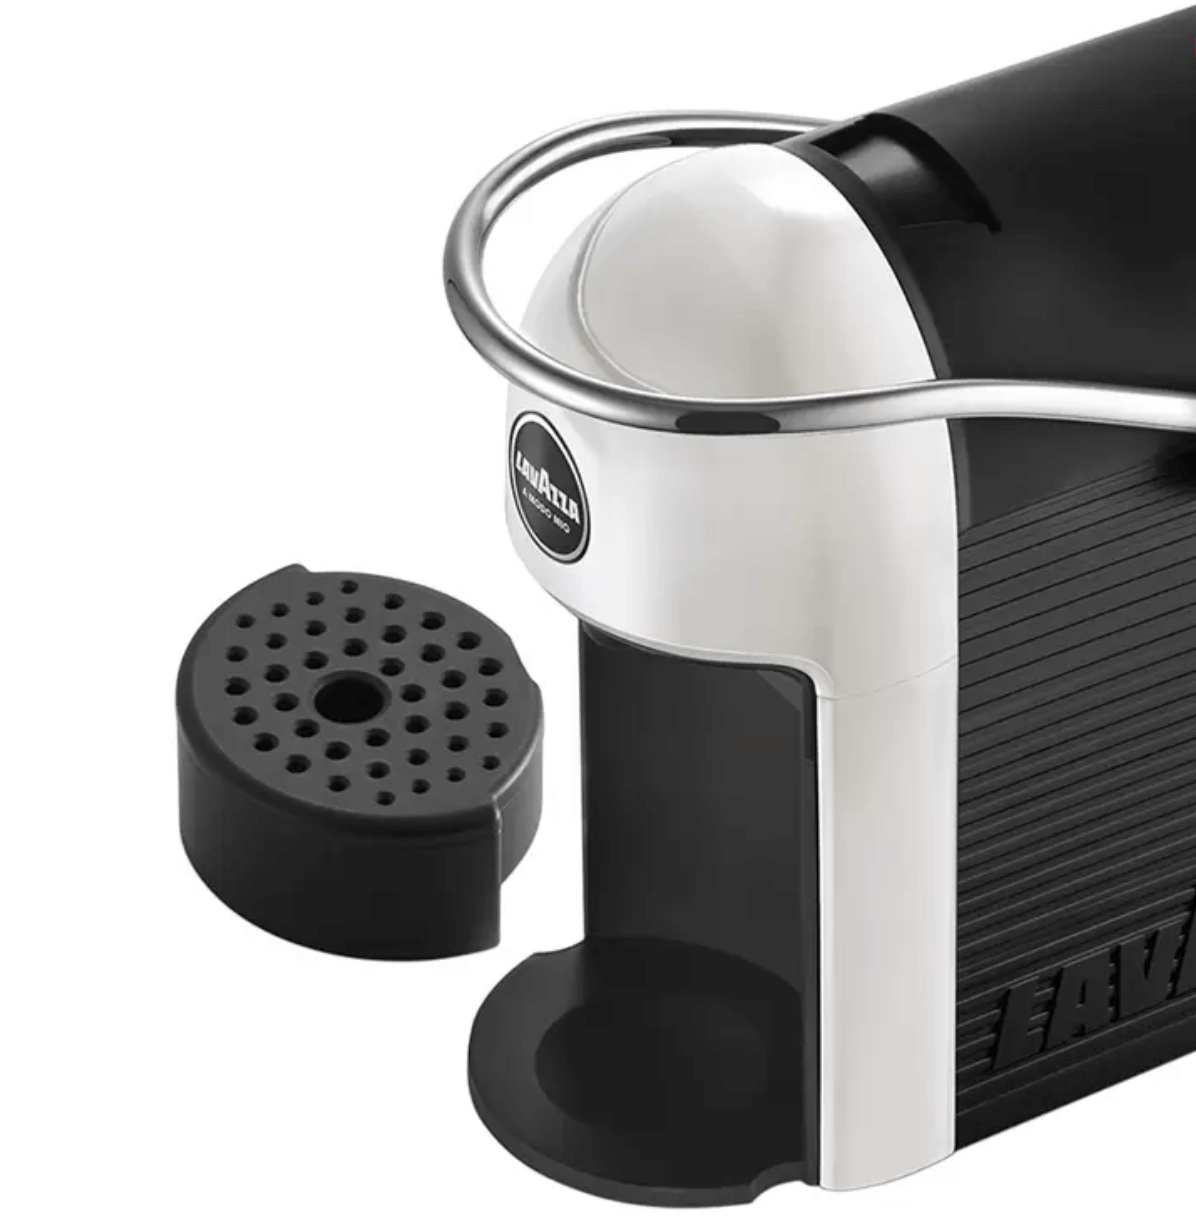 Lavazza Jolie Coffee Machine White with Milk Frother